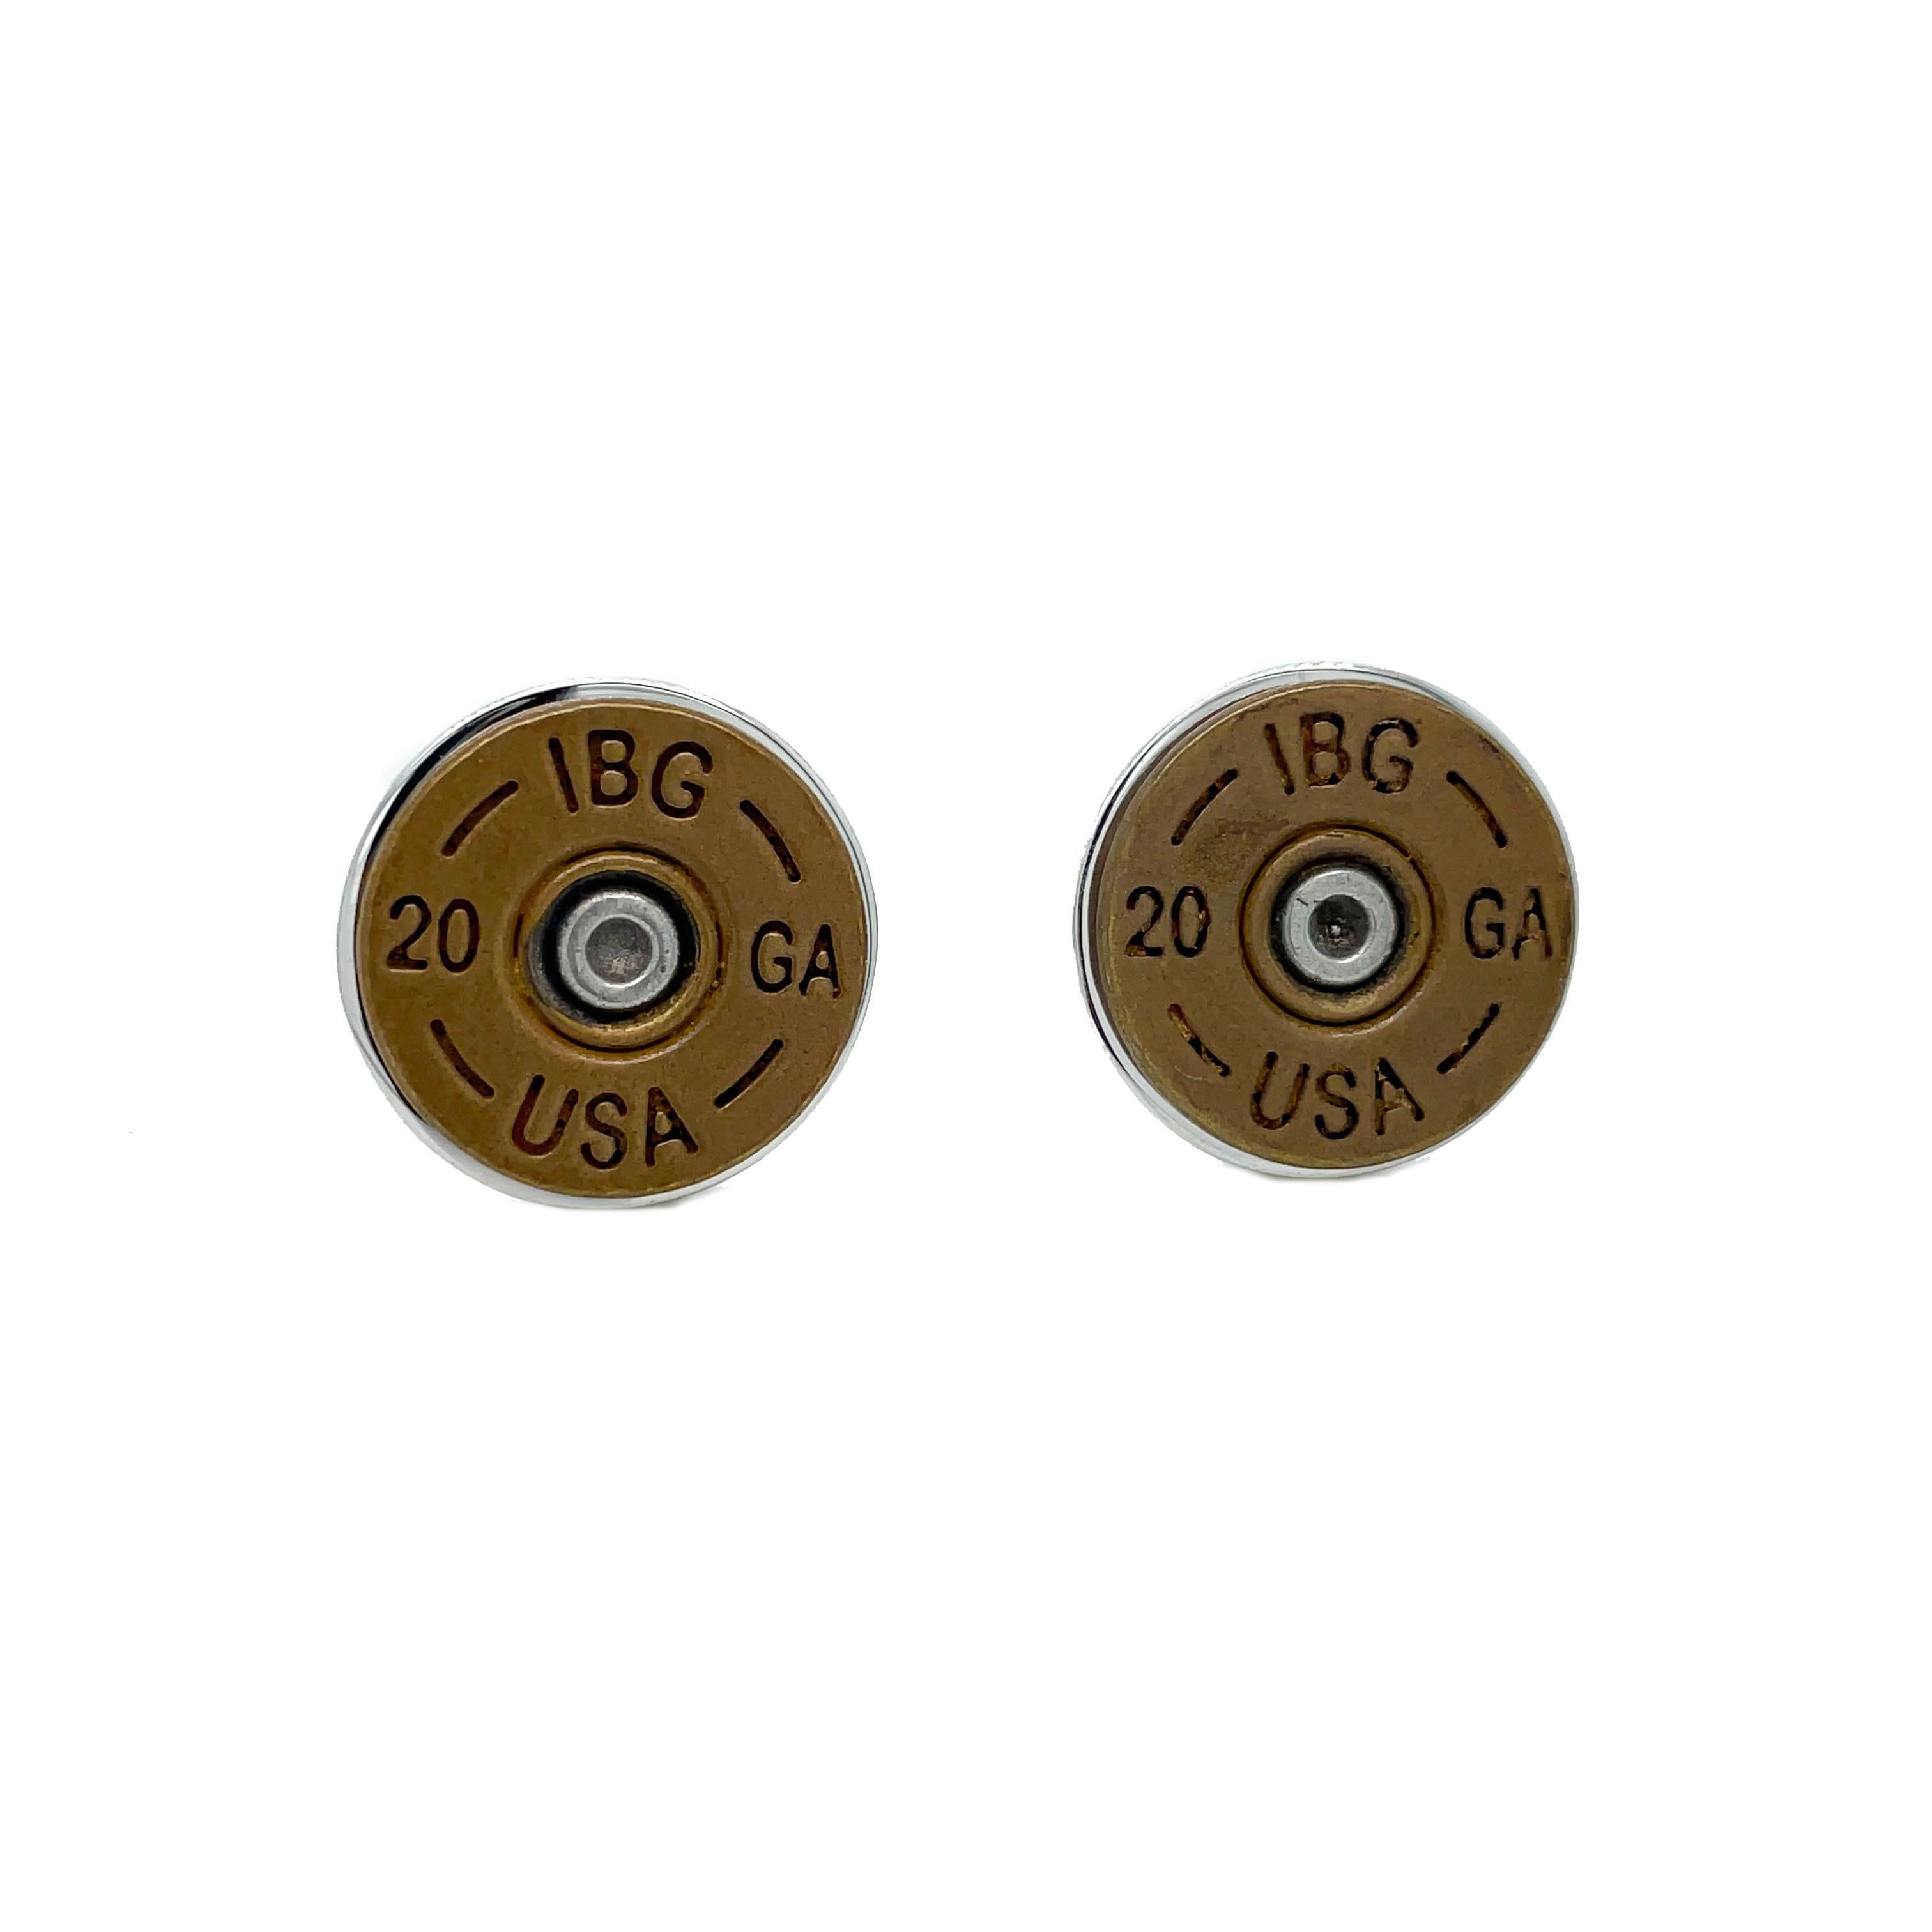 This is an amazing pair of cufflinks that feature the casing of a 20 gauge shotgun shell converted into a set of cufflinks! These cufflinks are brand new and have never been worn. The cufflinks are set in 925 Sterling Silver and the shell is in